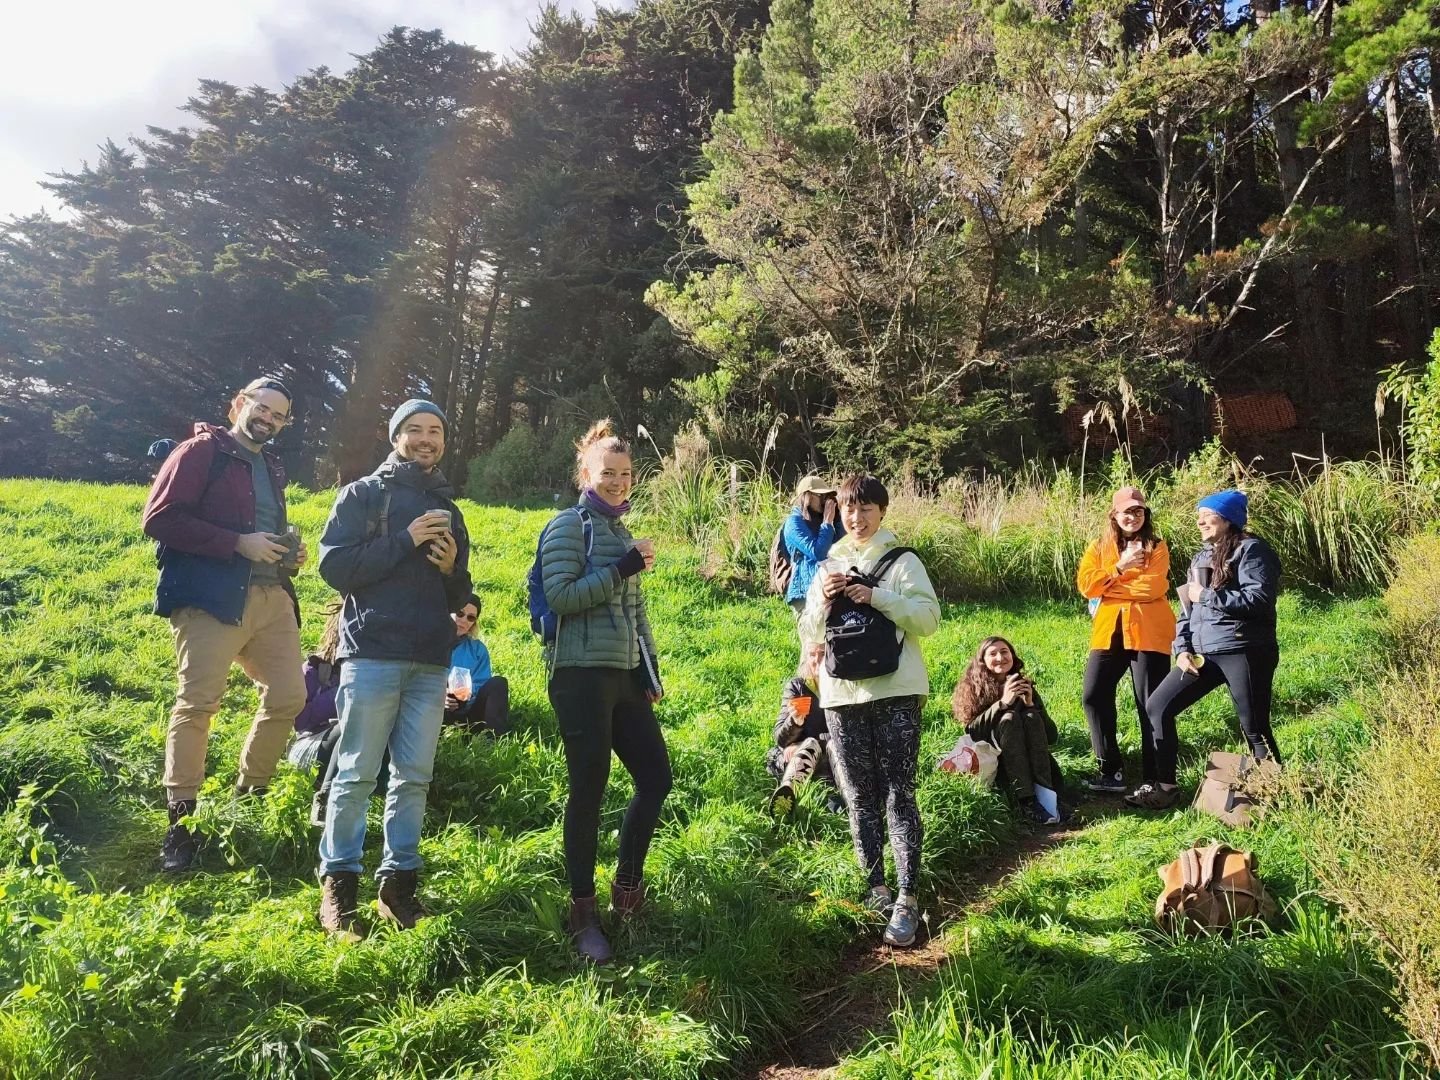 Autumn Foraging Workshop 🍃 such a beautiful fresh Autumn day in nature with a lovely group of foragers! 
There's such an abundance of lush greens, medicinal roots and dried seeds to be foraged at the moment 🧺
We had a delicious &amp; well deserved 